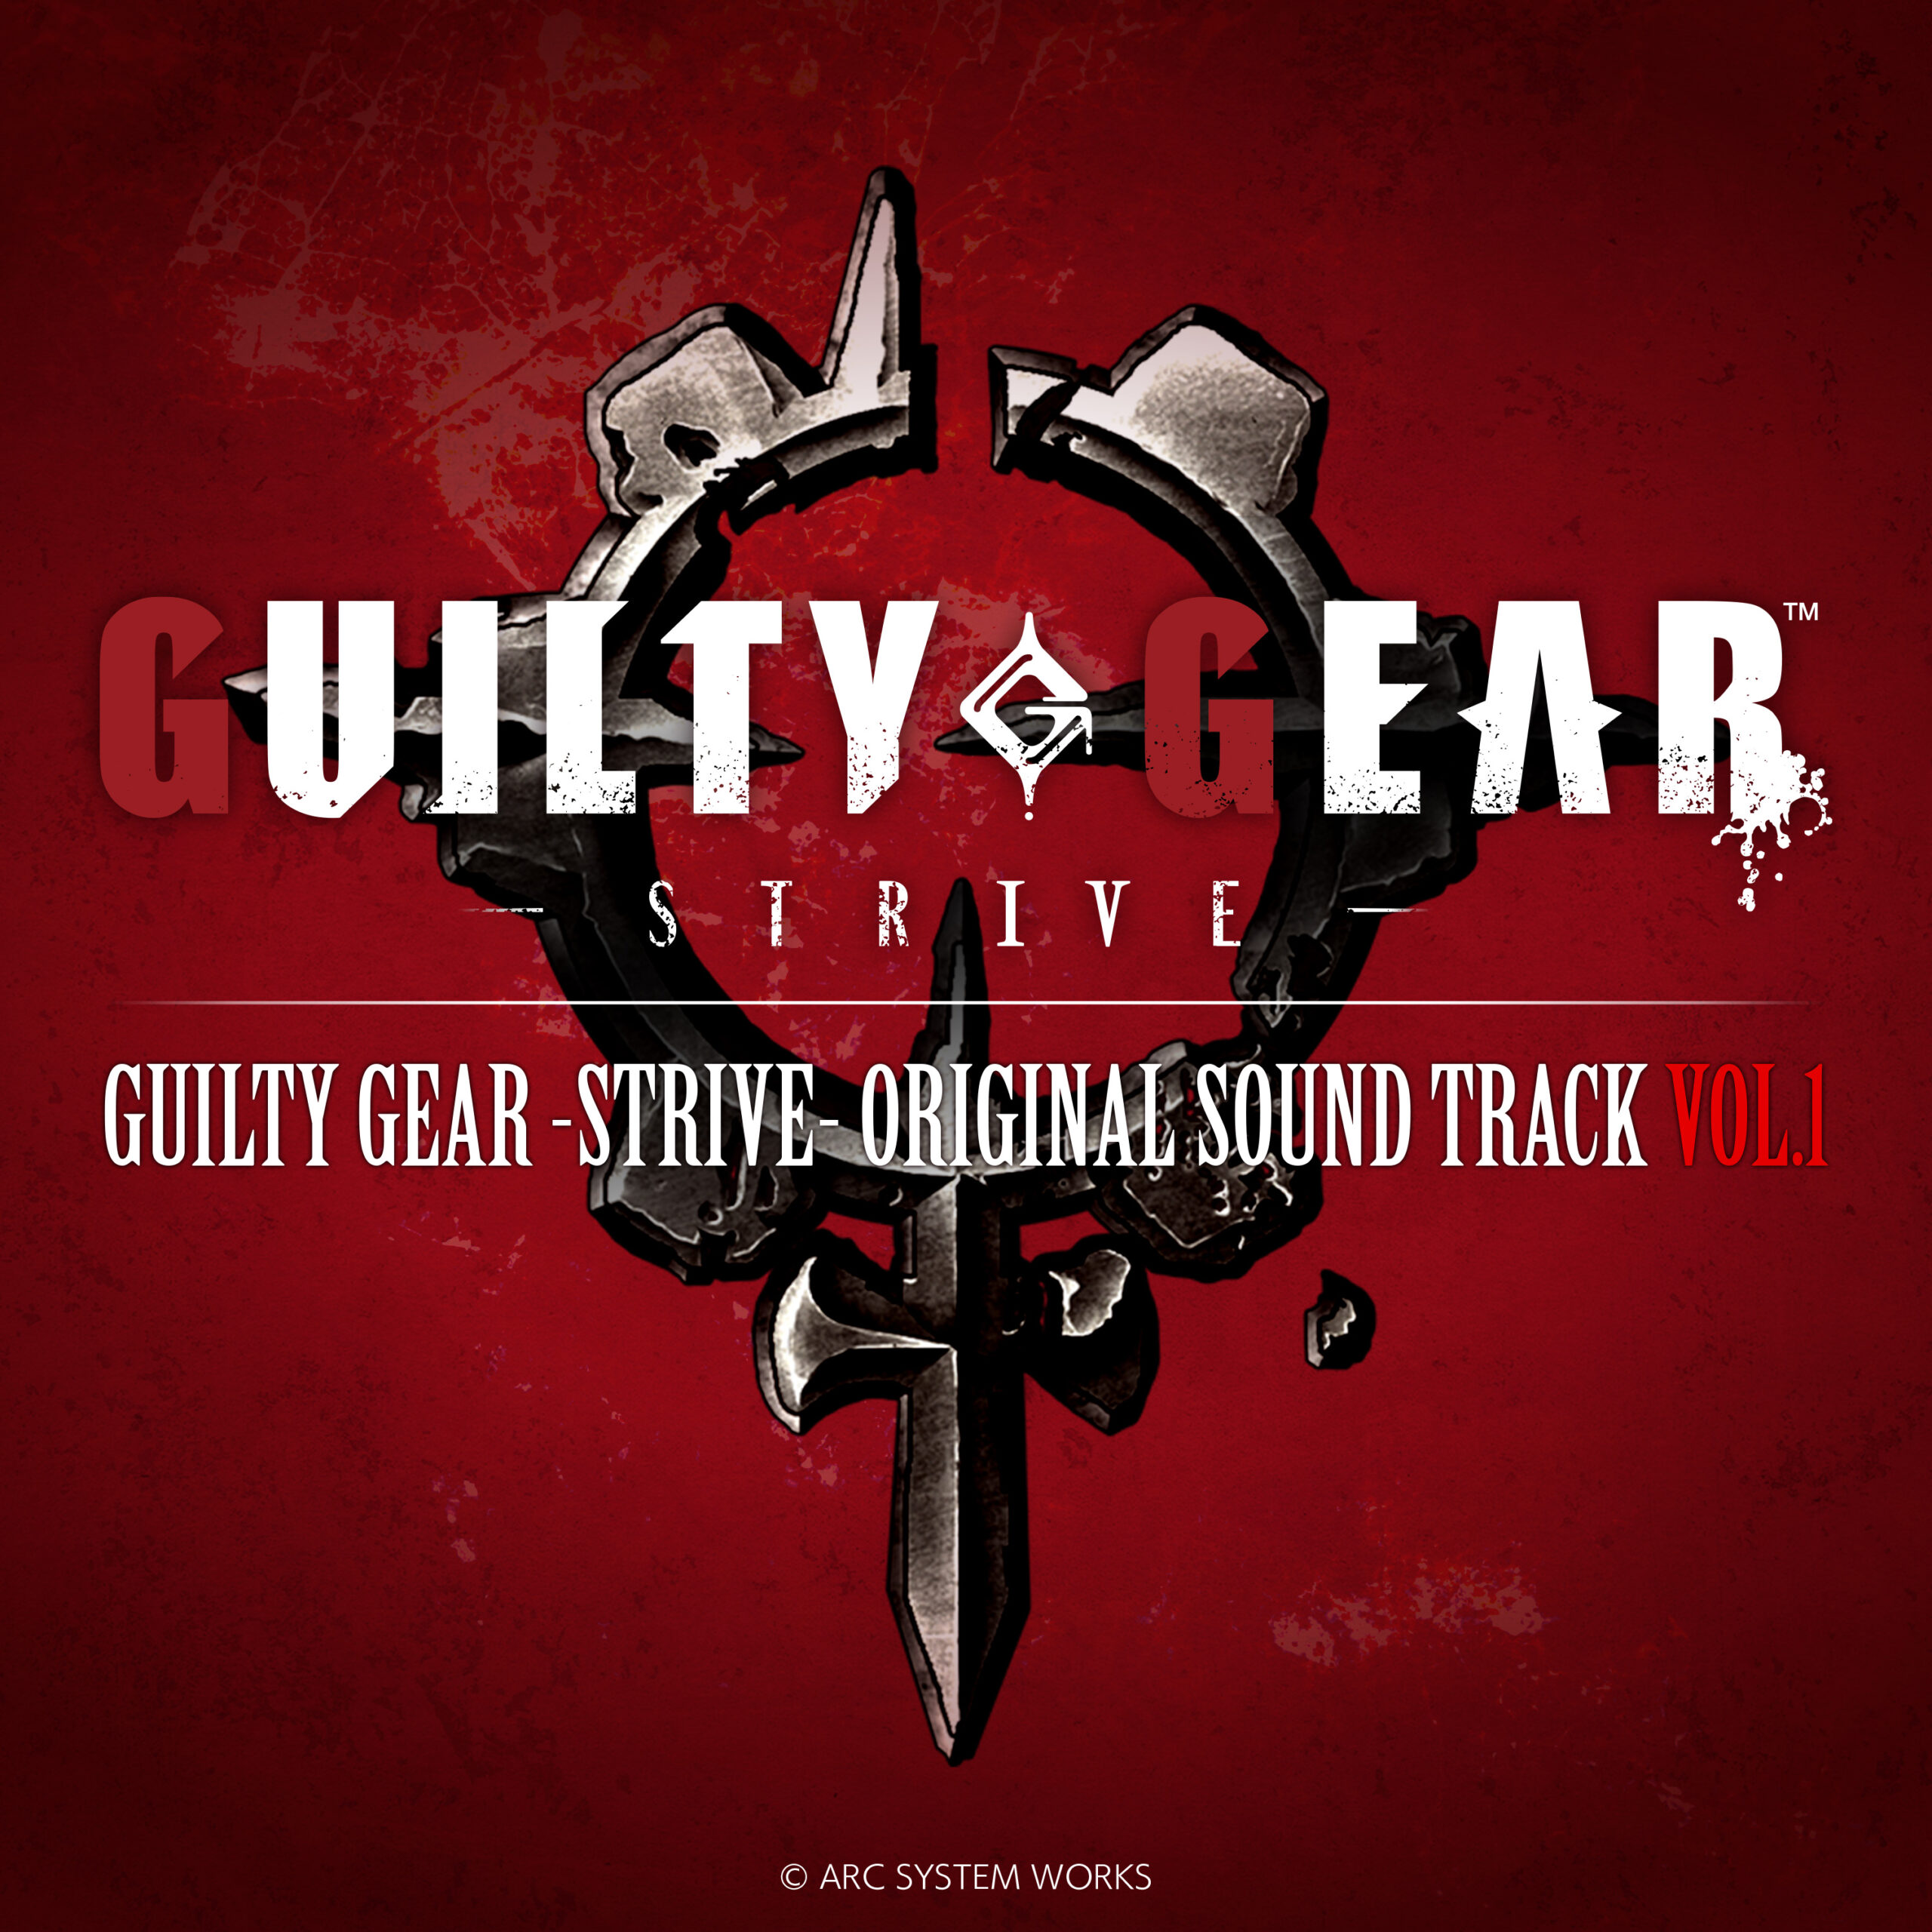 Its time to rock out to Guilty Gear -Strive- OST Vol.1!